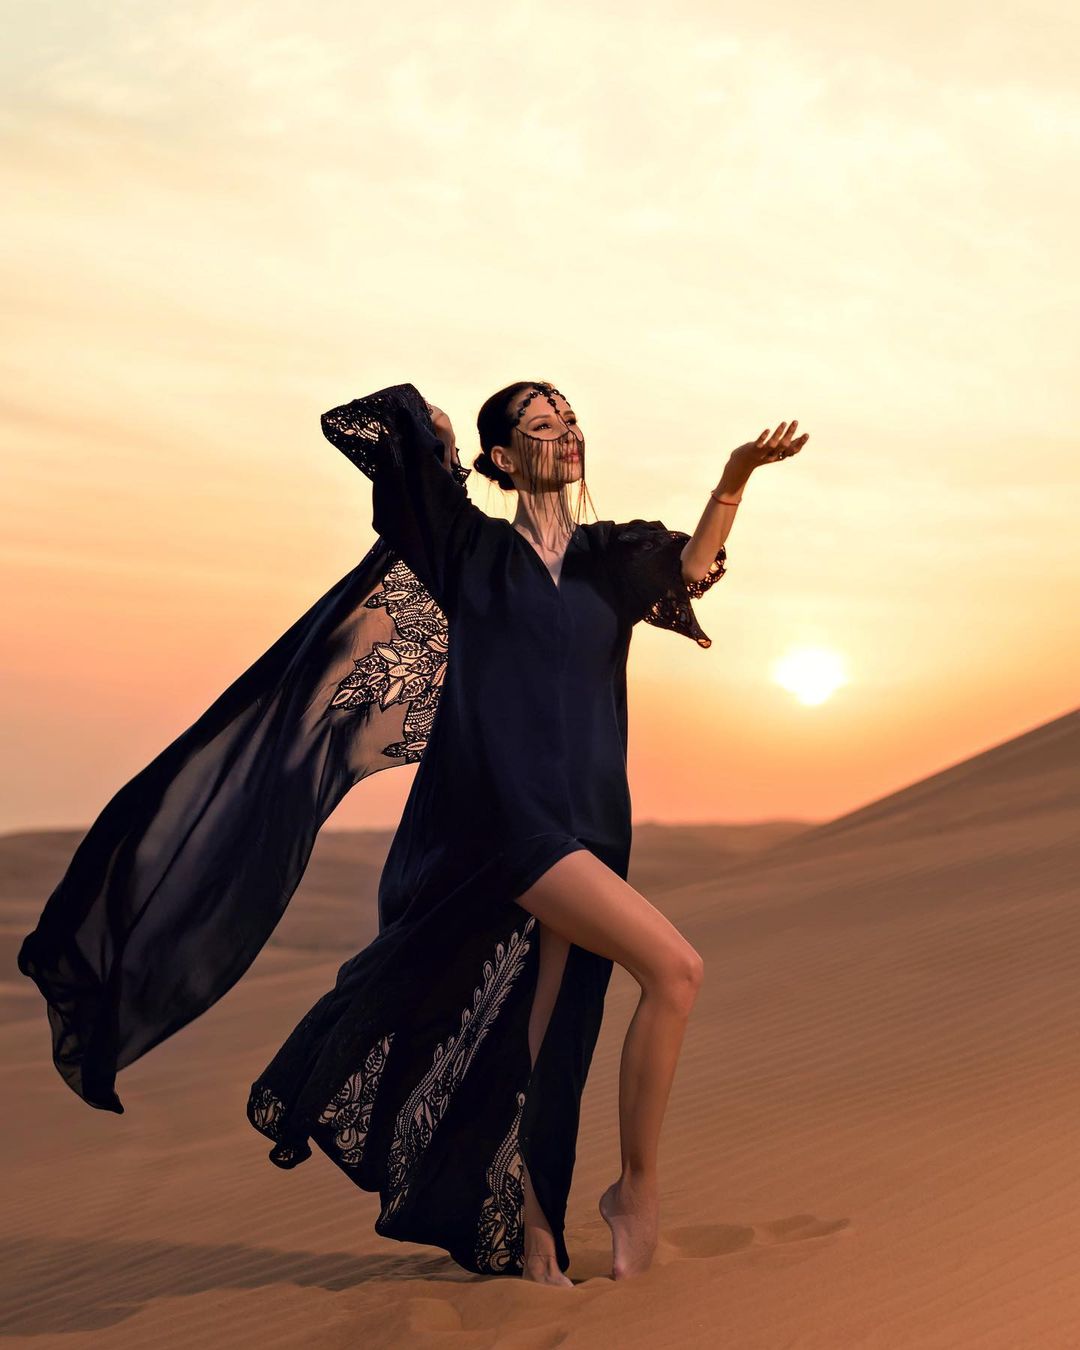 Experience the magic of the desert with our skilled female photographer. Book now to capture stunning images of your natural beauty against the breathtaking backdrop of the desert!